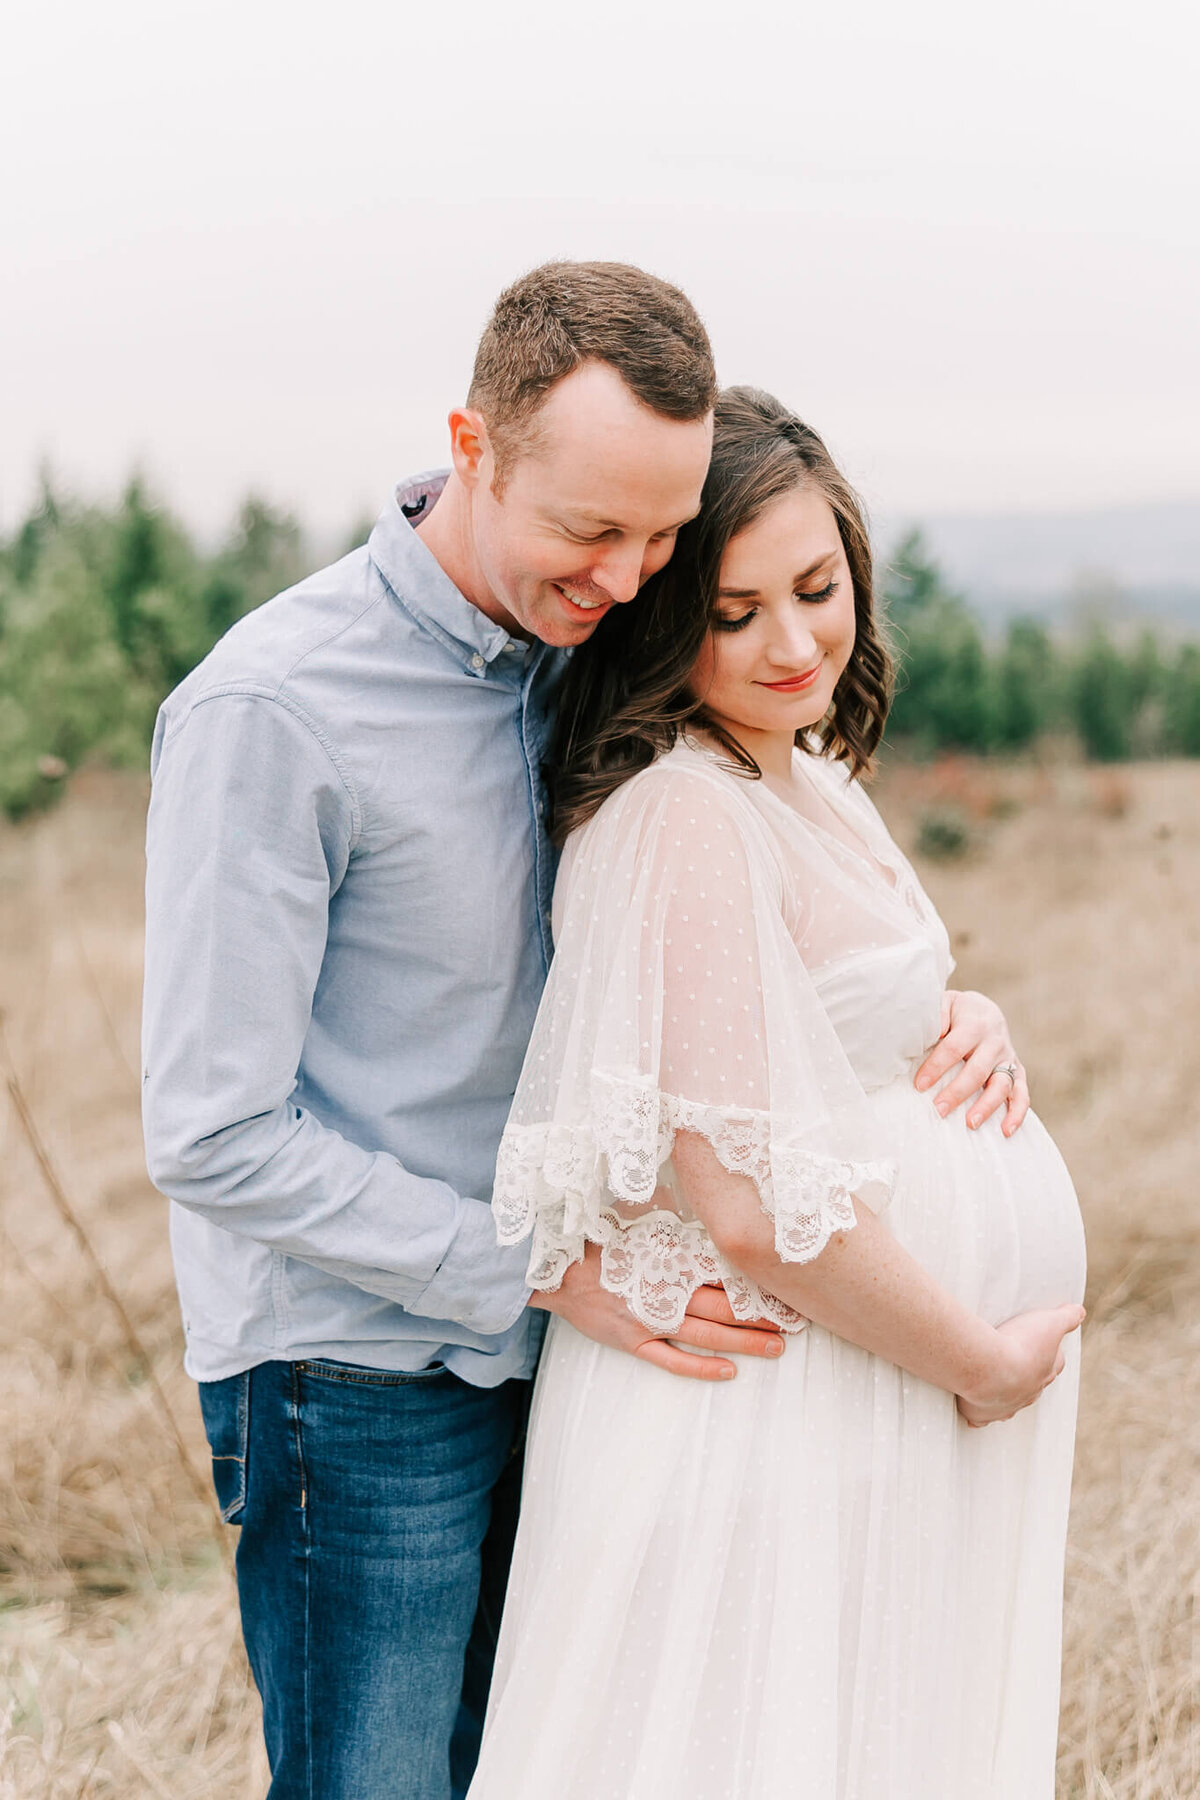 mom wearing white dress happily holding her pregnant belly with her husband behind her who is wearing a blue shirt and jeans